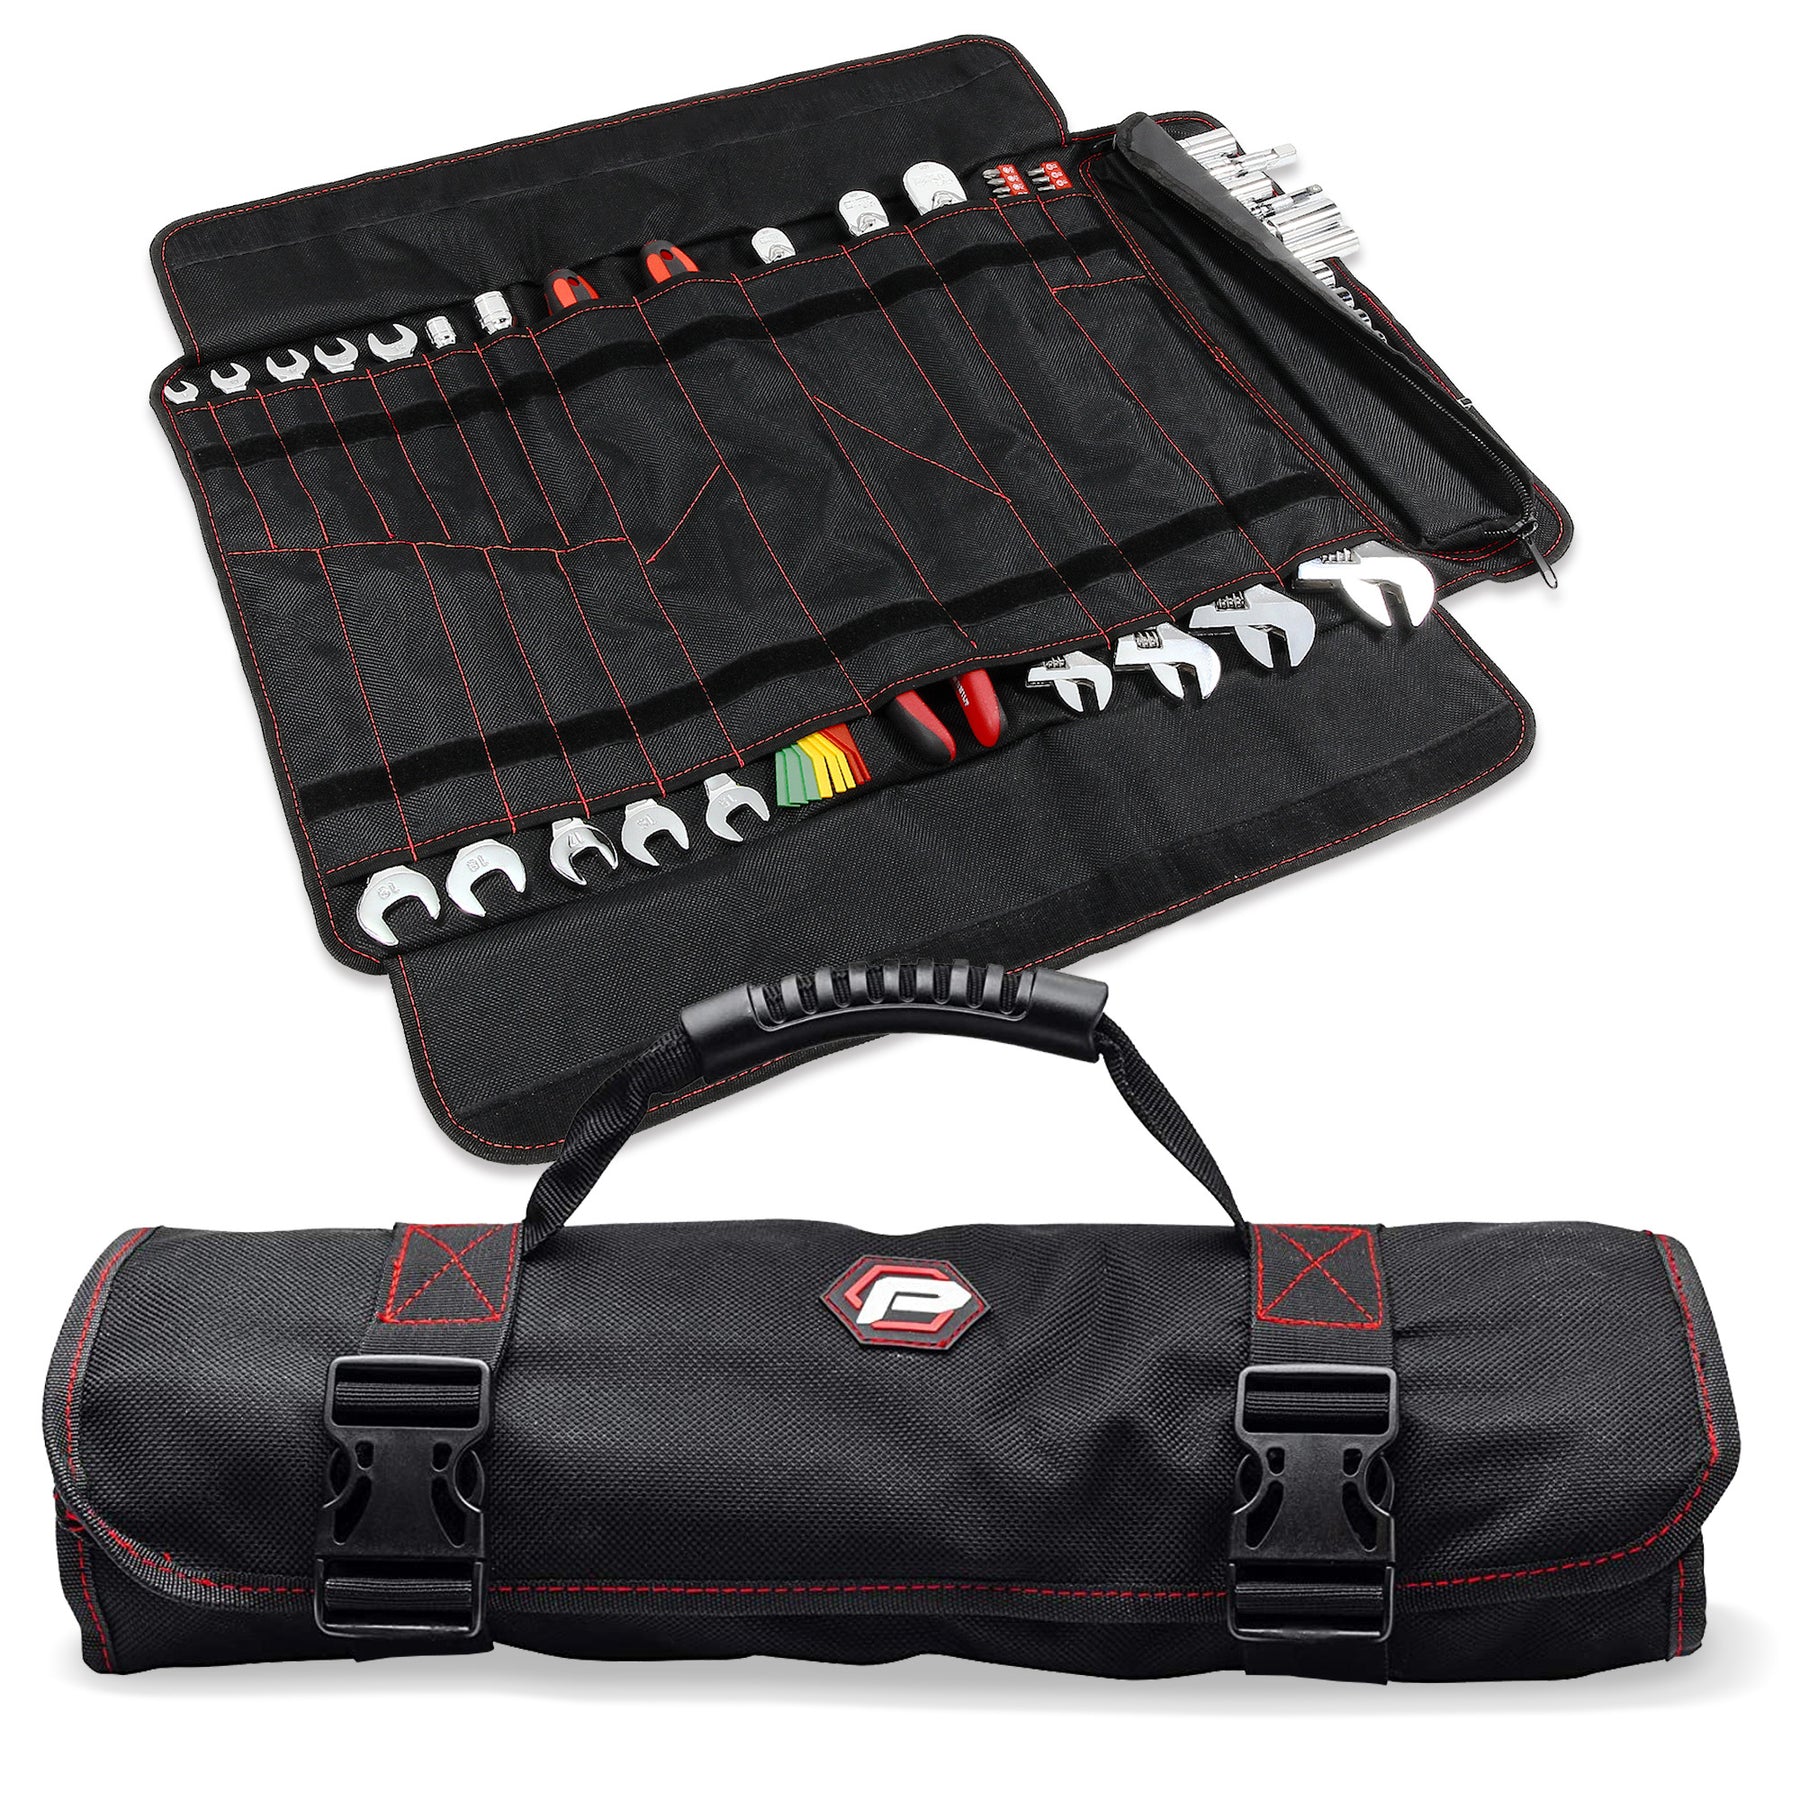 Xtremepowerus Rolling Tool Bag 18 With Wheels Portable Storage